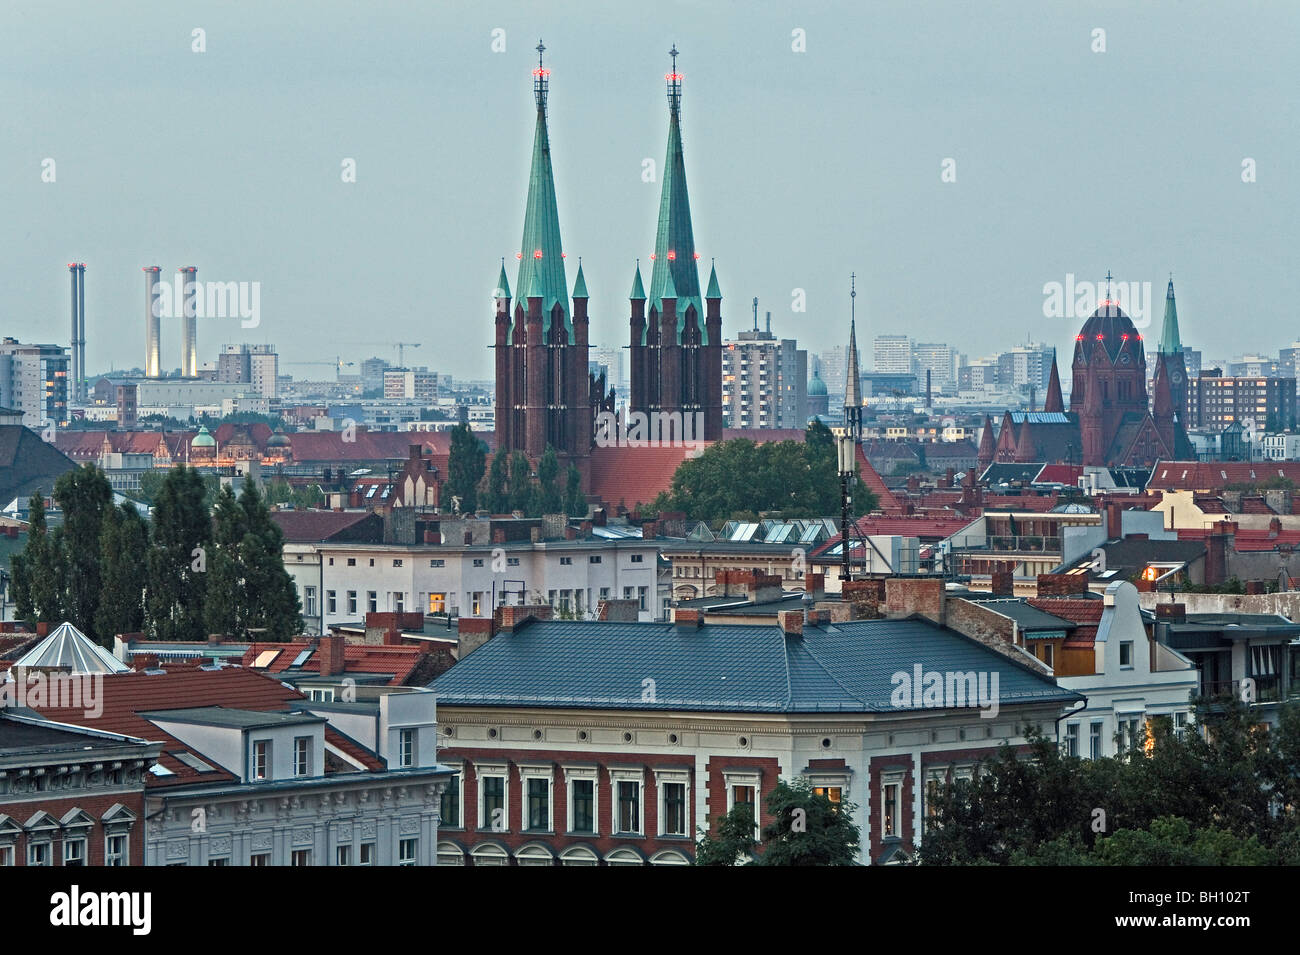 View at roofs and the steeples of St Bonifatius church, Kreuzberg, Berlin, Germany, Europe Stock Photo